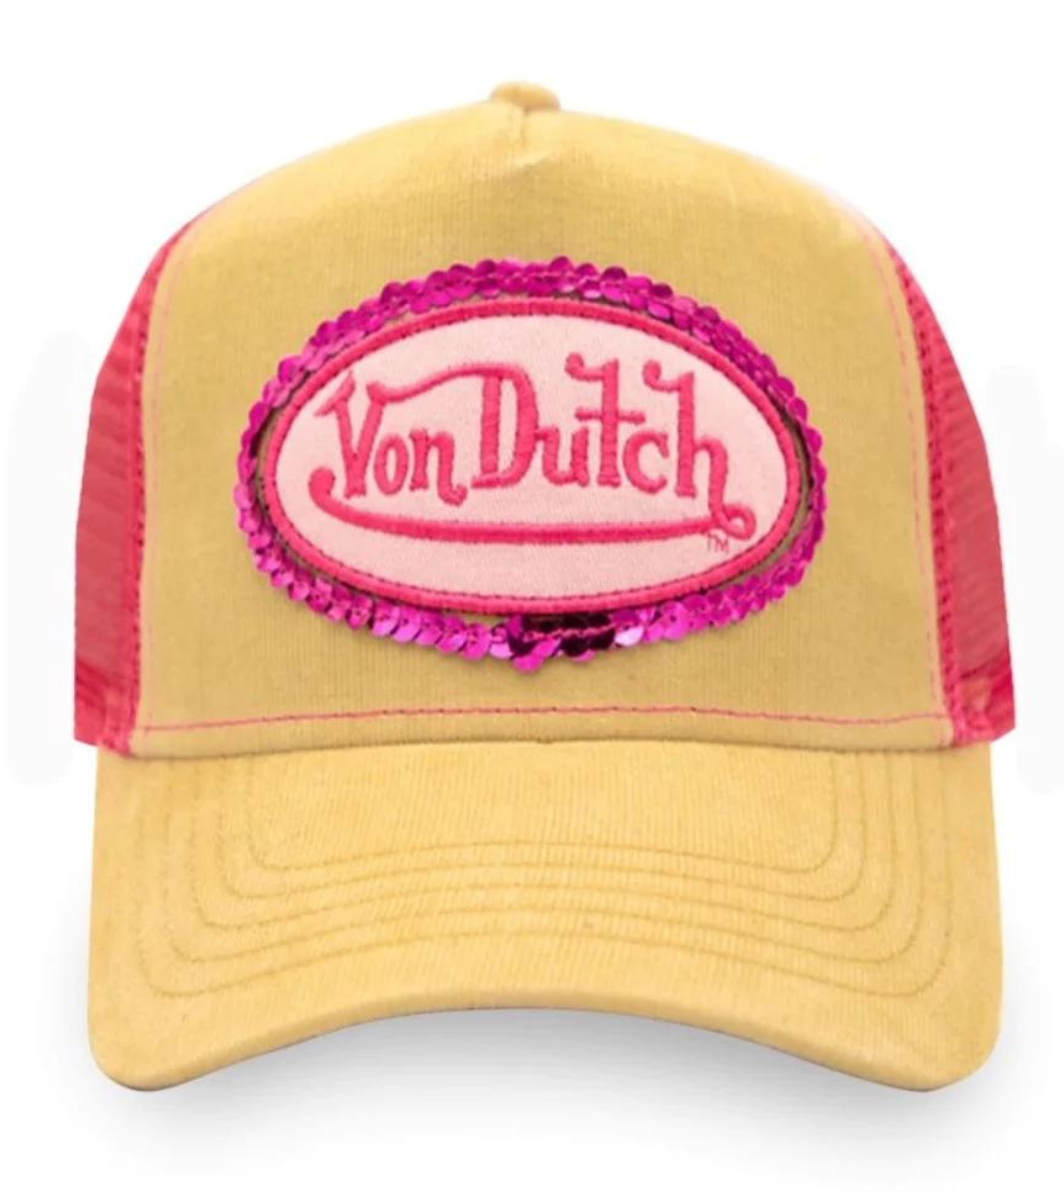 Classic Snapback Trucker Hat by Von Dutch features pink sequins with the iconic logo patch on front, pink breathable mesh rear, and an adjustable snapback panel.